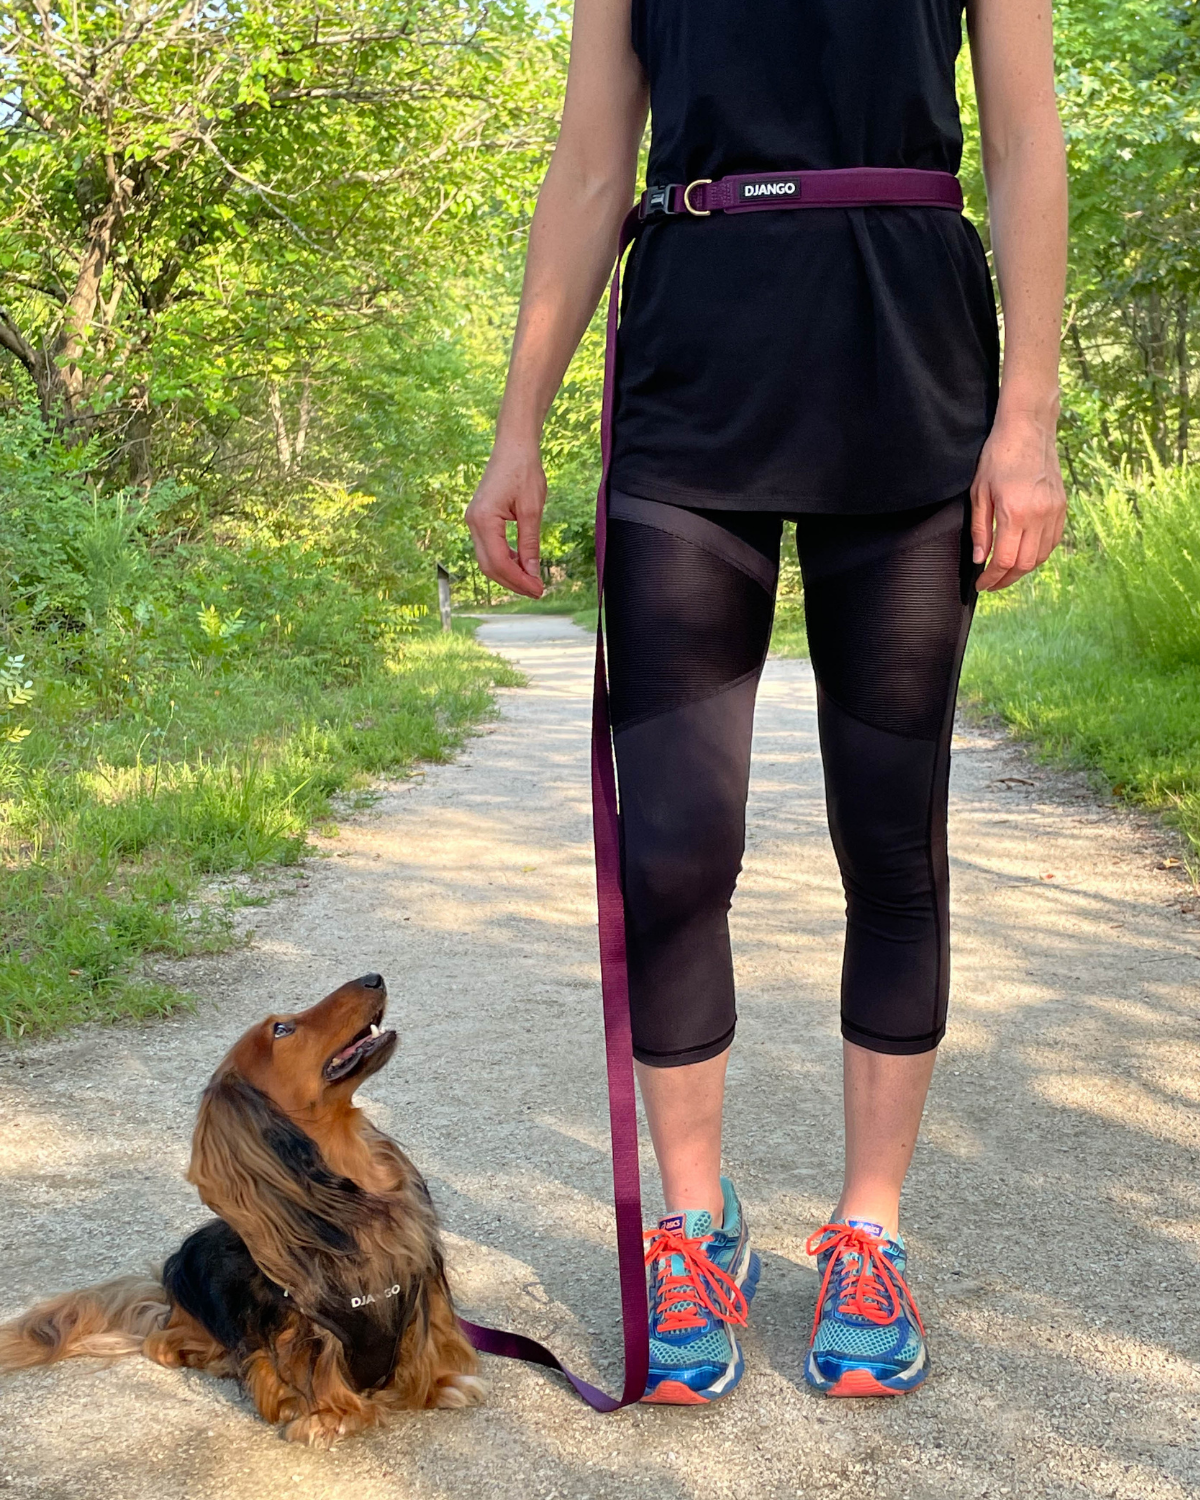 Hiking on a mountain trail and want to give your dog more freedom of movement? Easily adjust your leash to its max length of 6.5 feet and enjoy the comfort of the soft and padded neoprene handle. Going jogging with your pup? Pushing a stroller and need use of your hands? Secure the adjustable leash around your waist for hands-free functionality.